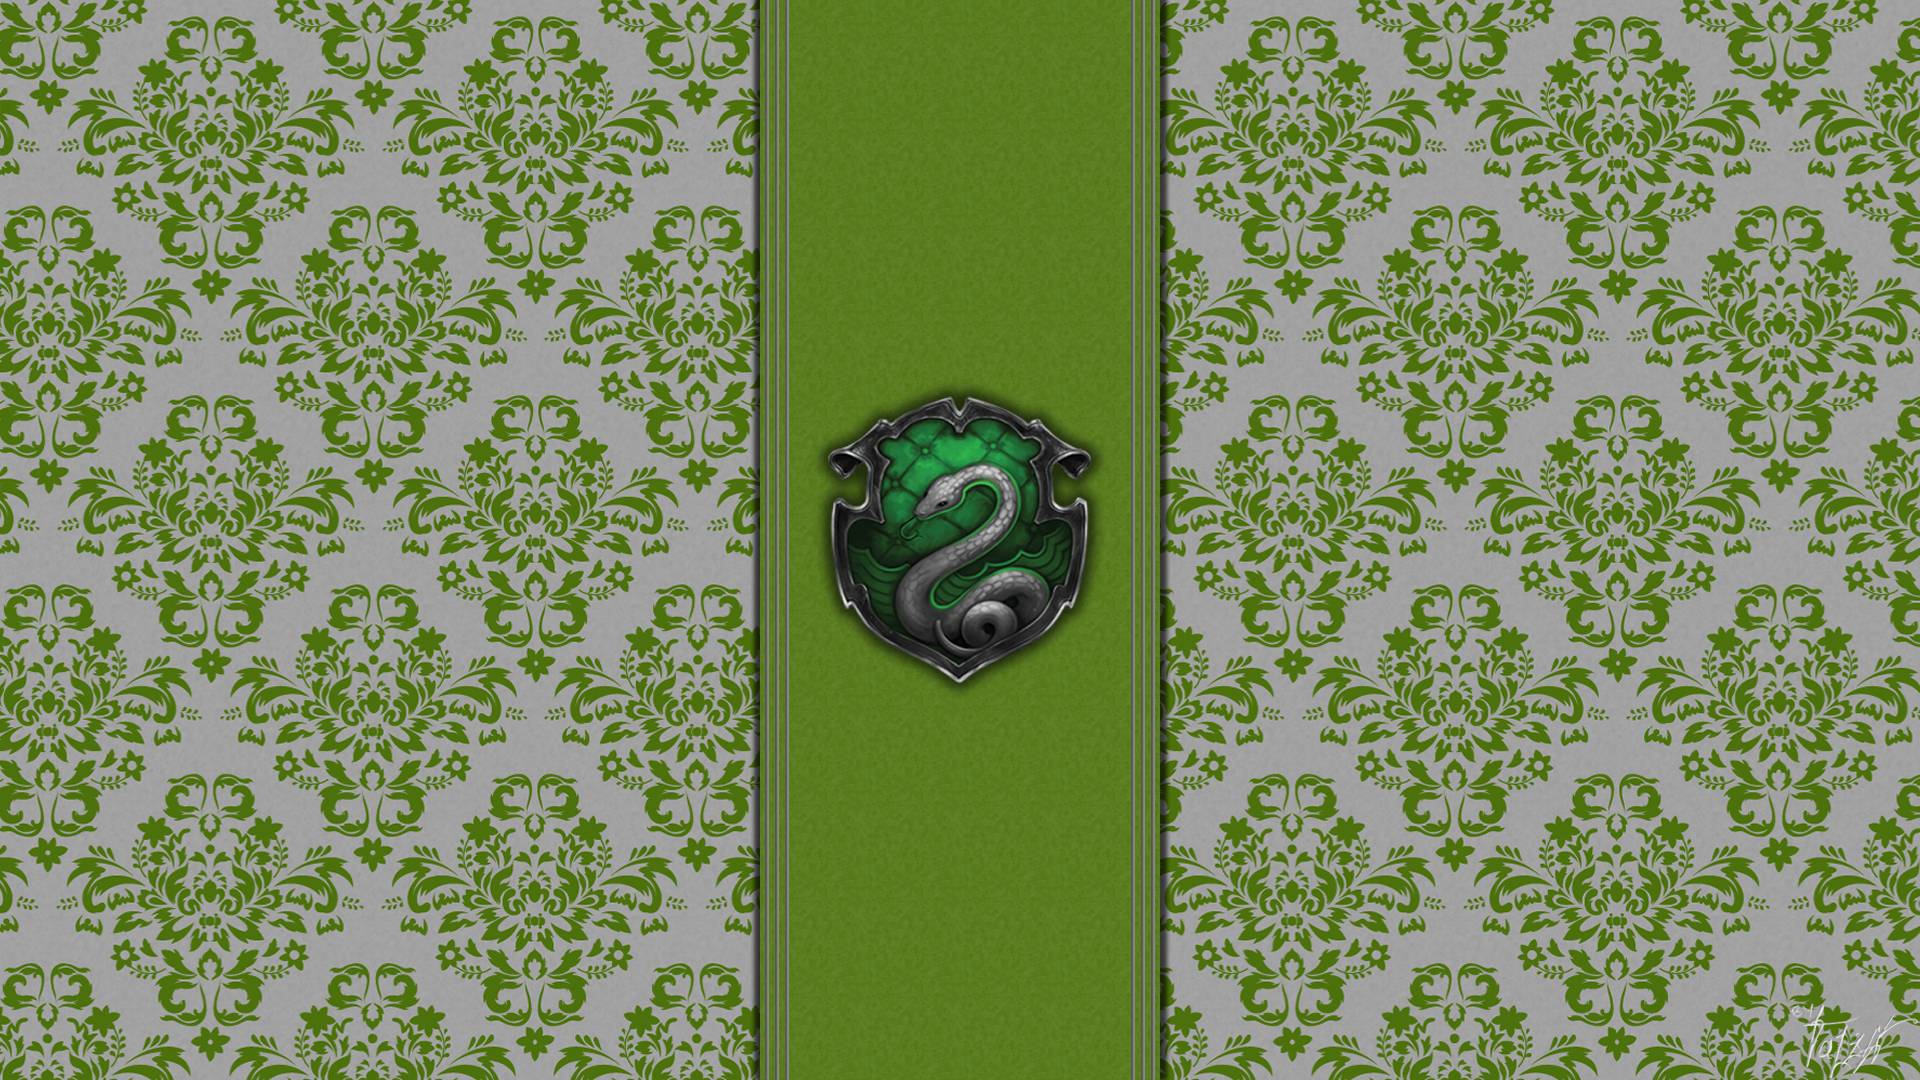 Wallpaper for all the Slytherins